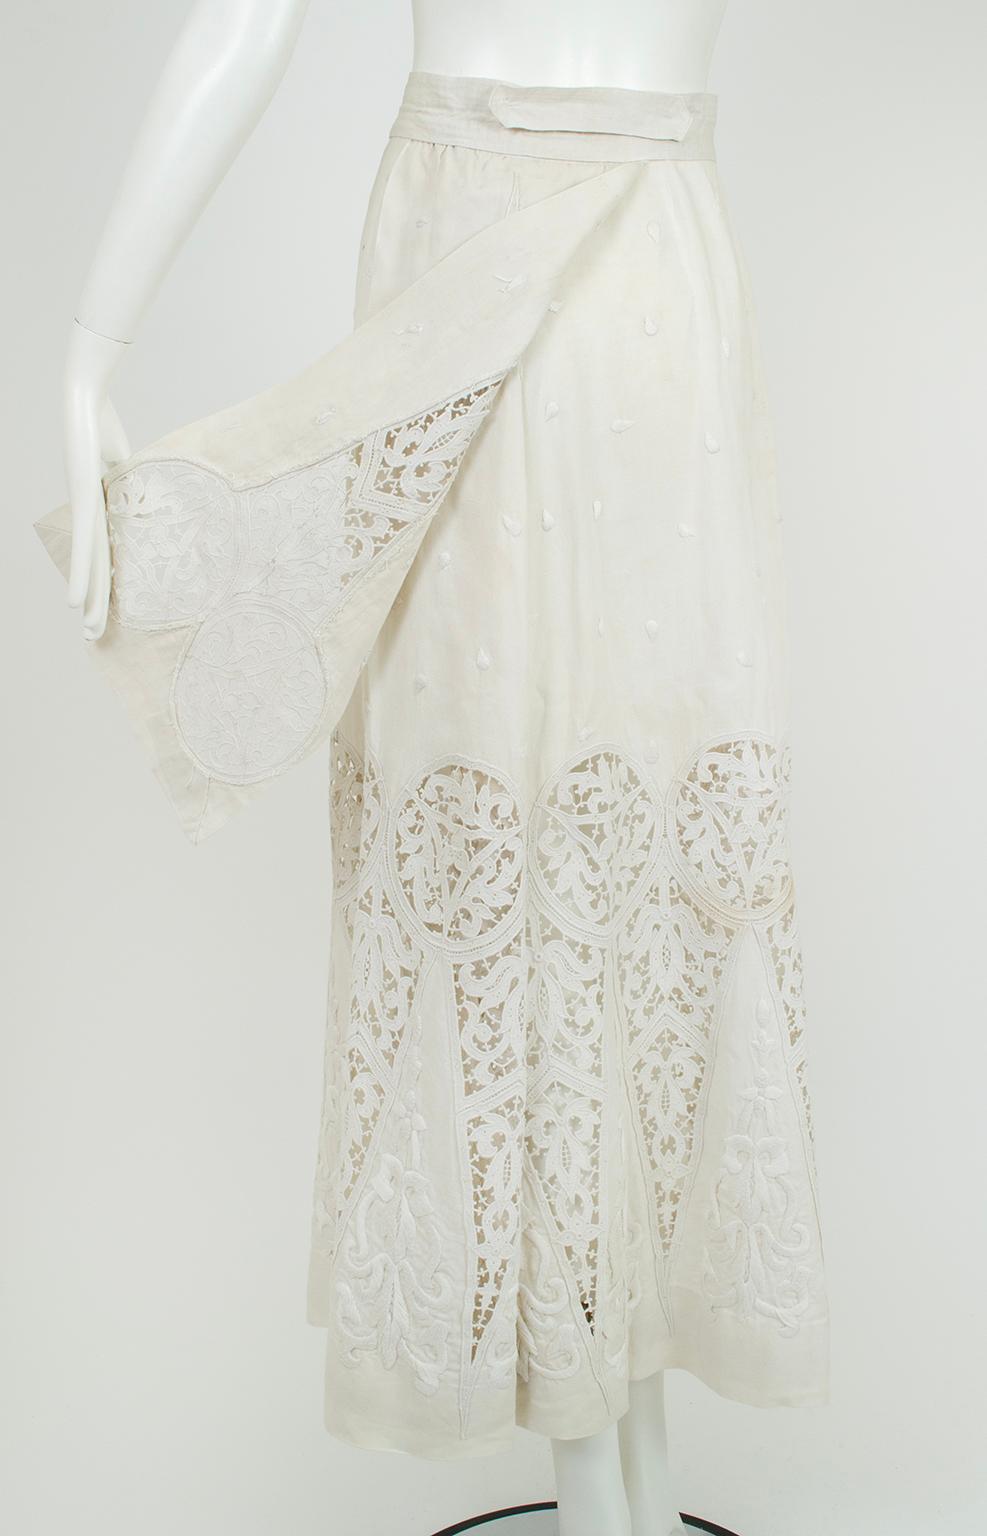 Edwardian White Irish Crochet and Cotton Walking or Wedding Suit – L, 1900s For Sale 10